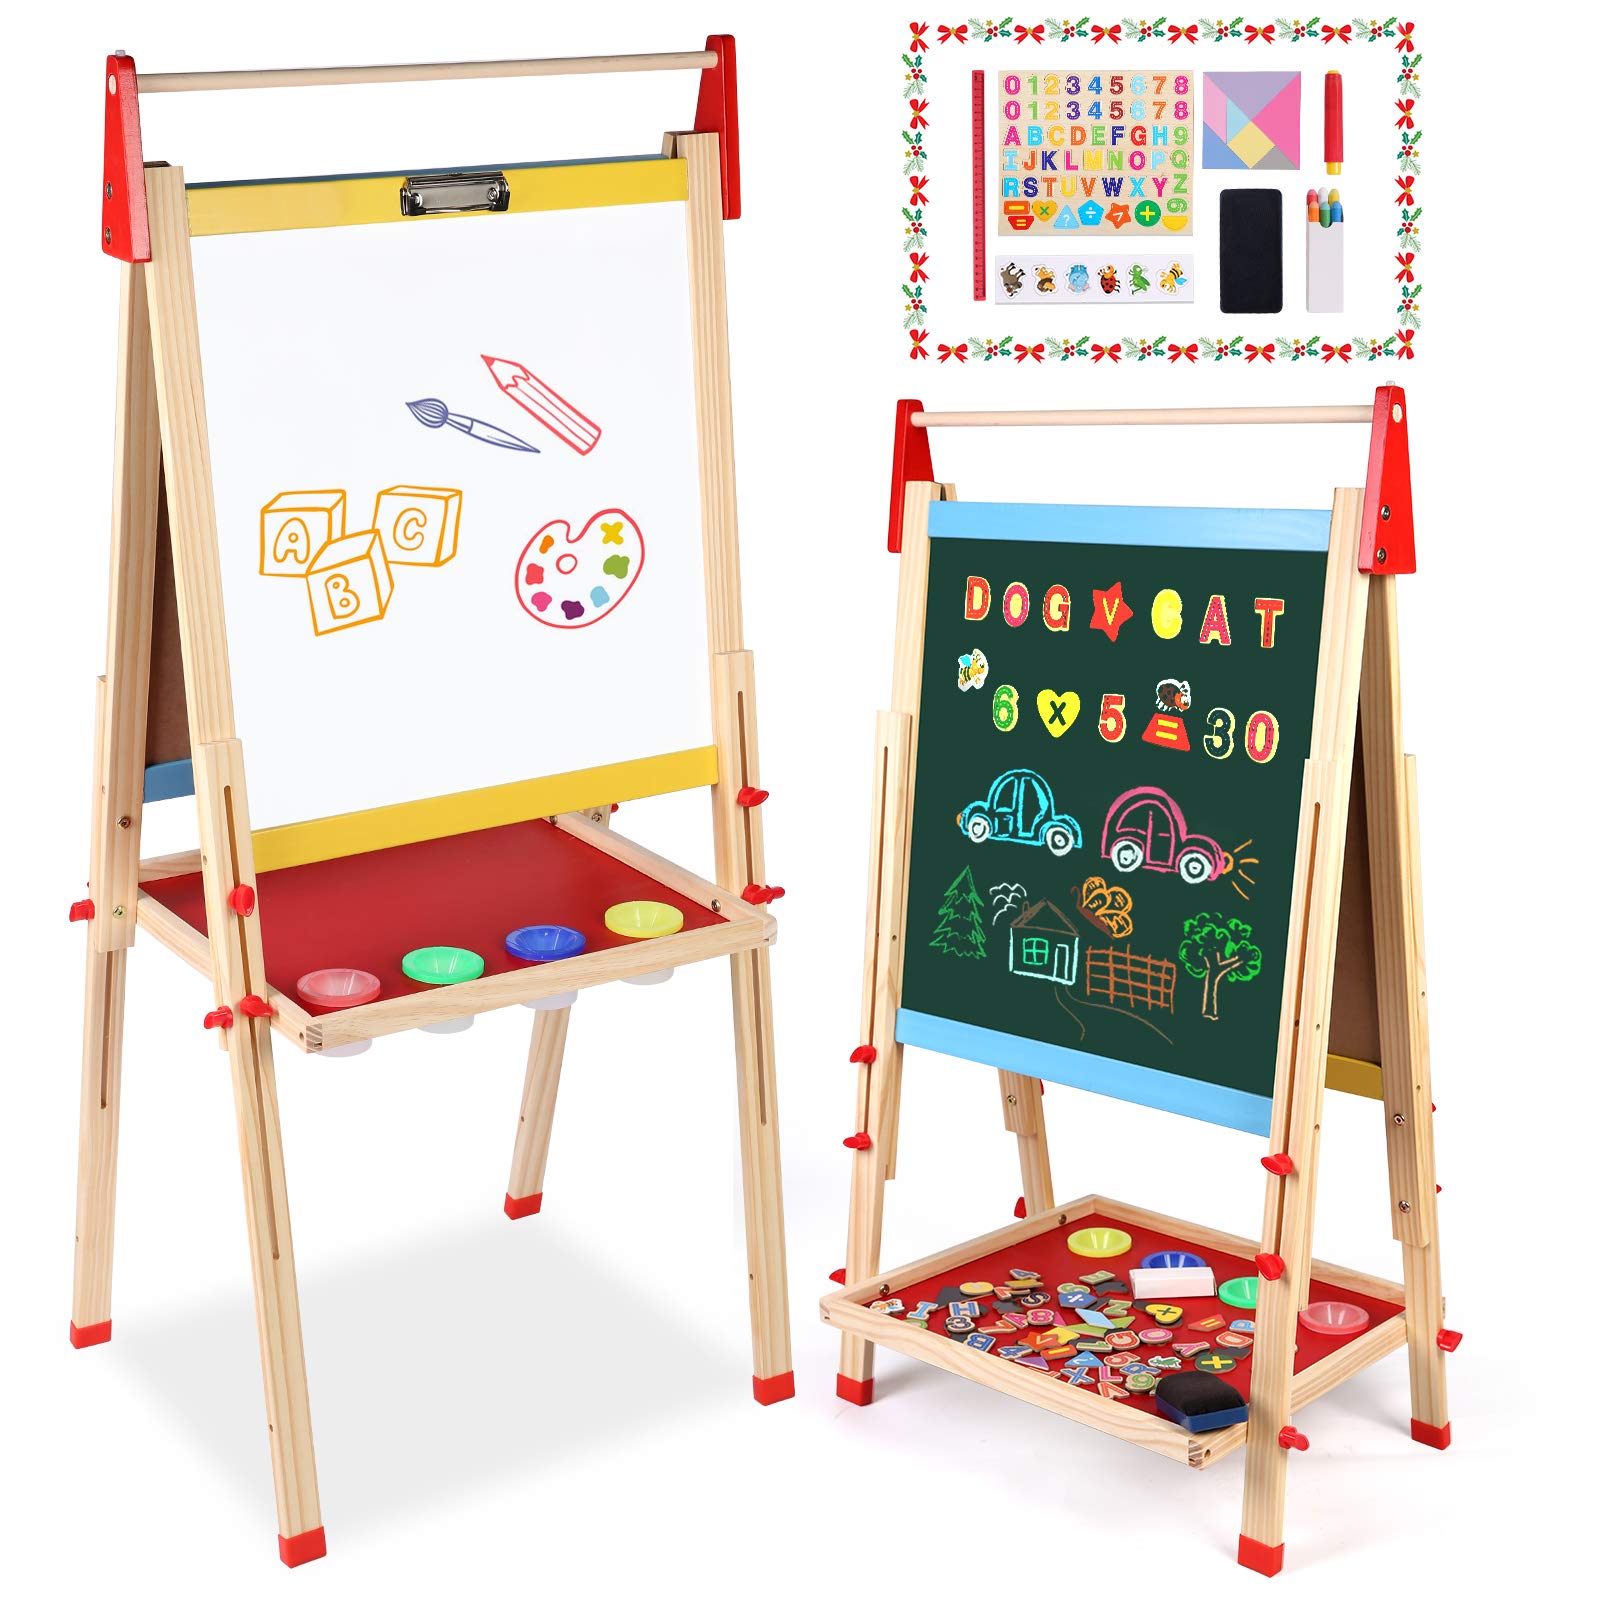 Kids Wooden Art Easel Double-Sided Whiteboard and Chalkboard Adjustable Standing Easel Painting Drawing Board with Paper Roll Holder Magnetic Letters and Numbers Accessories for Boys and Girls Featured Image